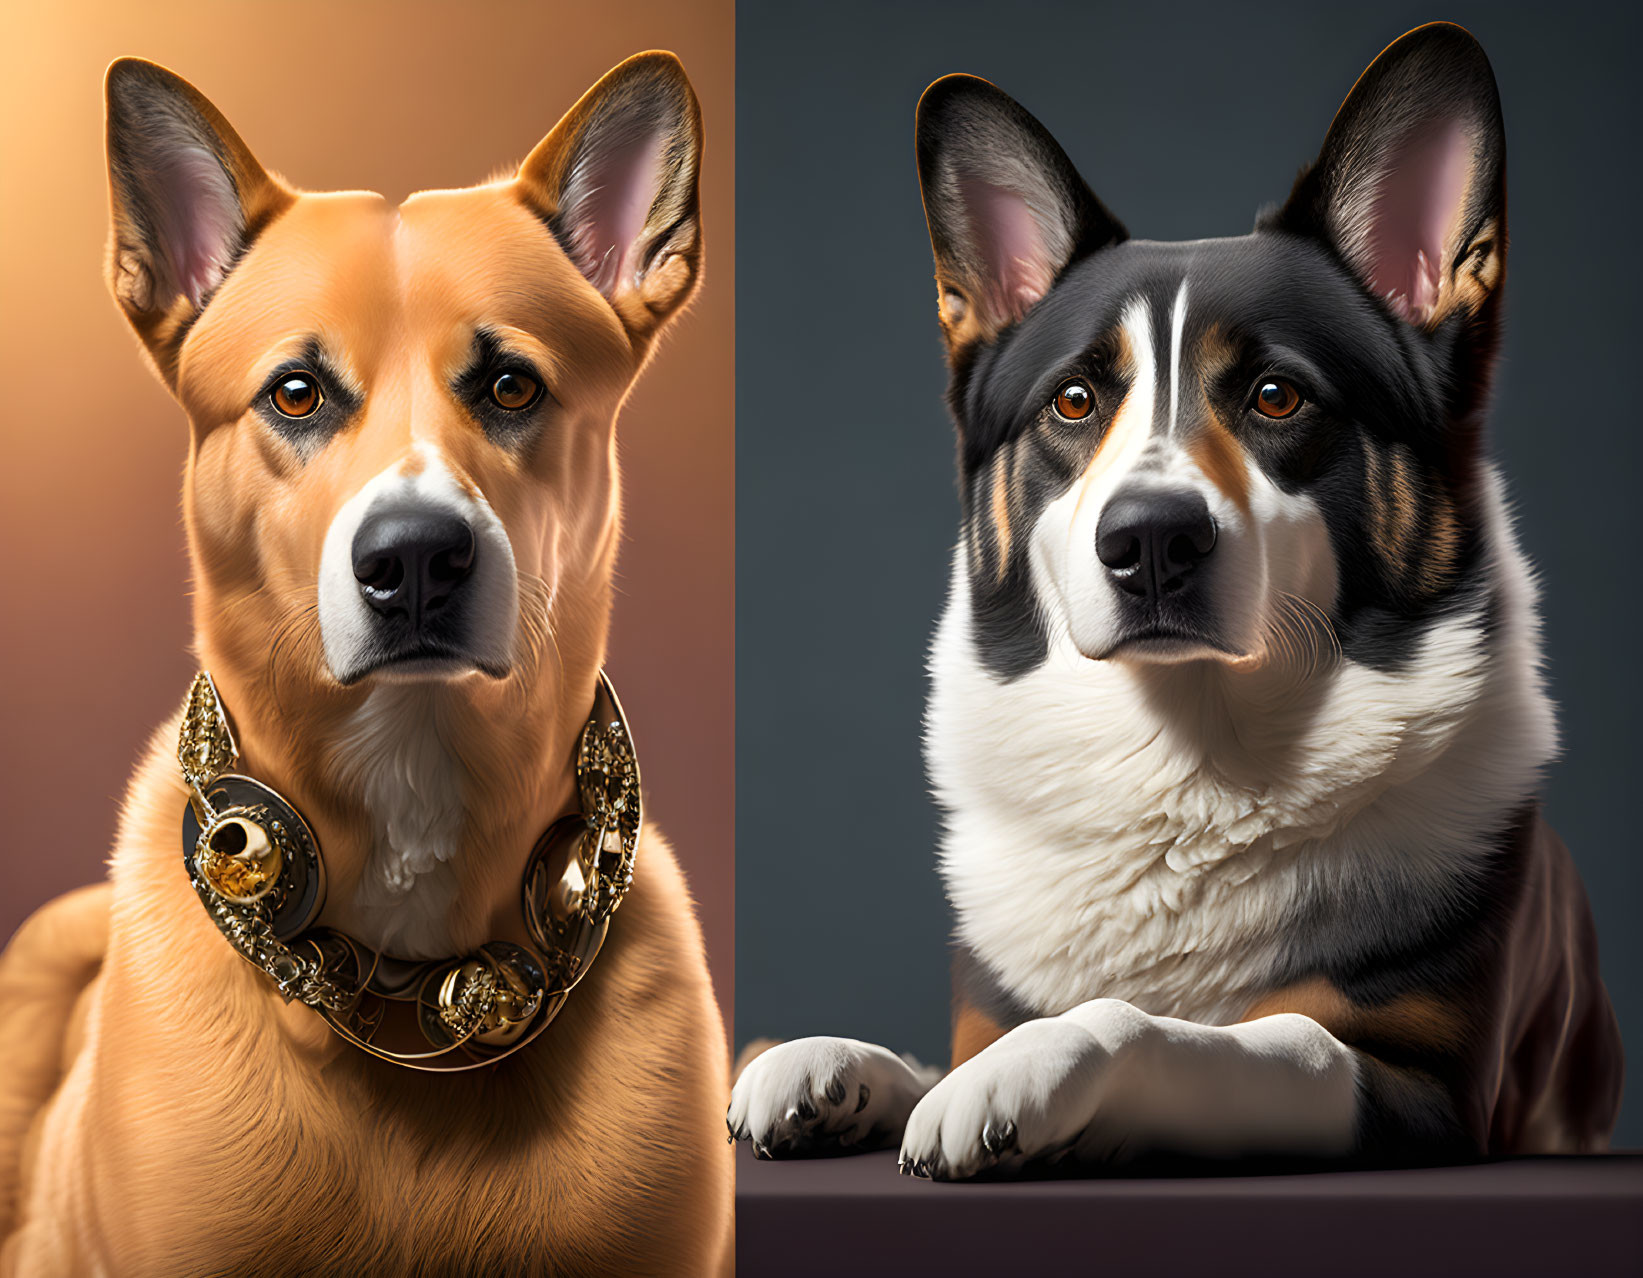 Two dogs with human-like expressions and a golden collar on a dual-toned background